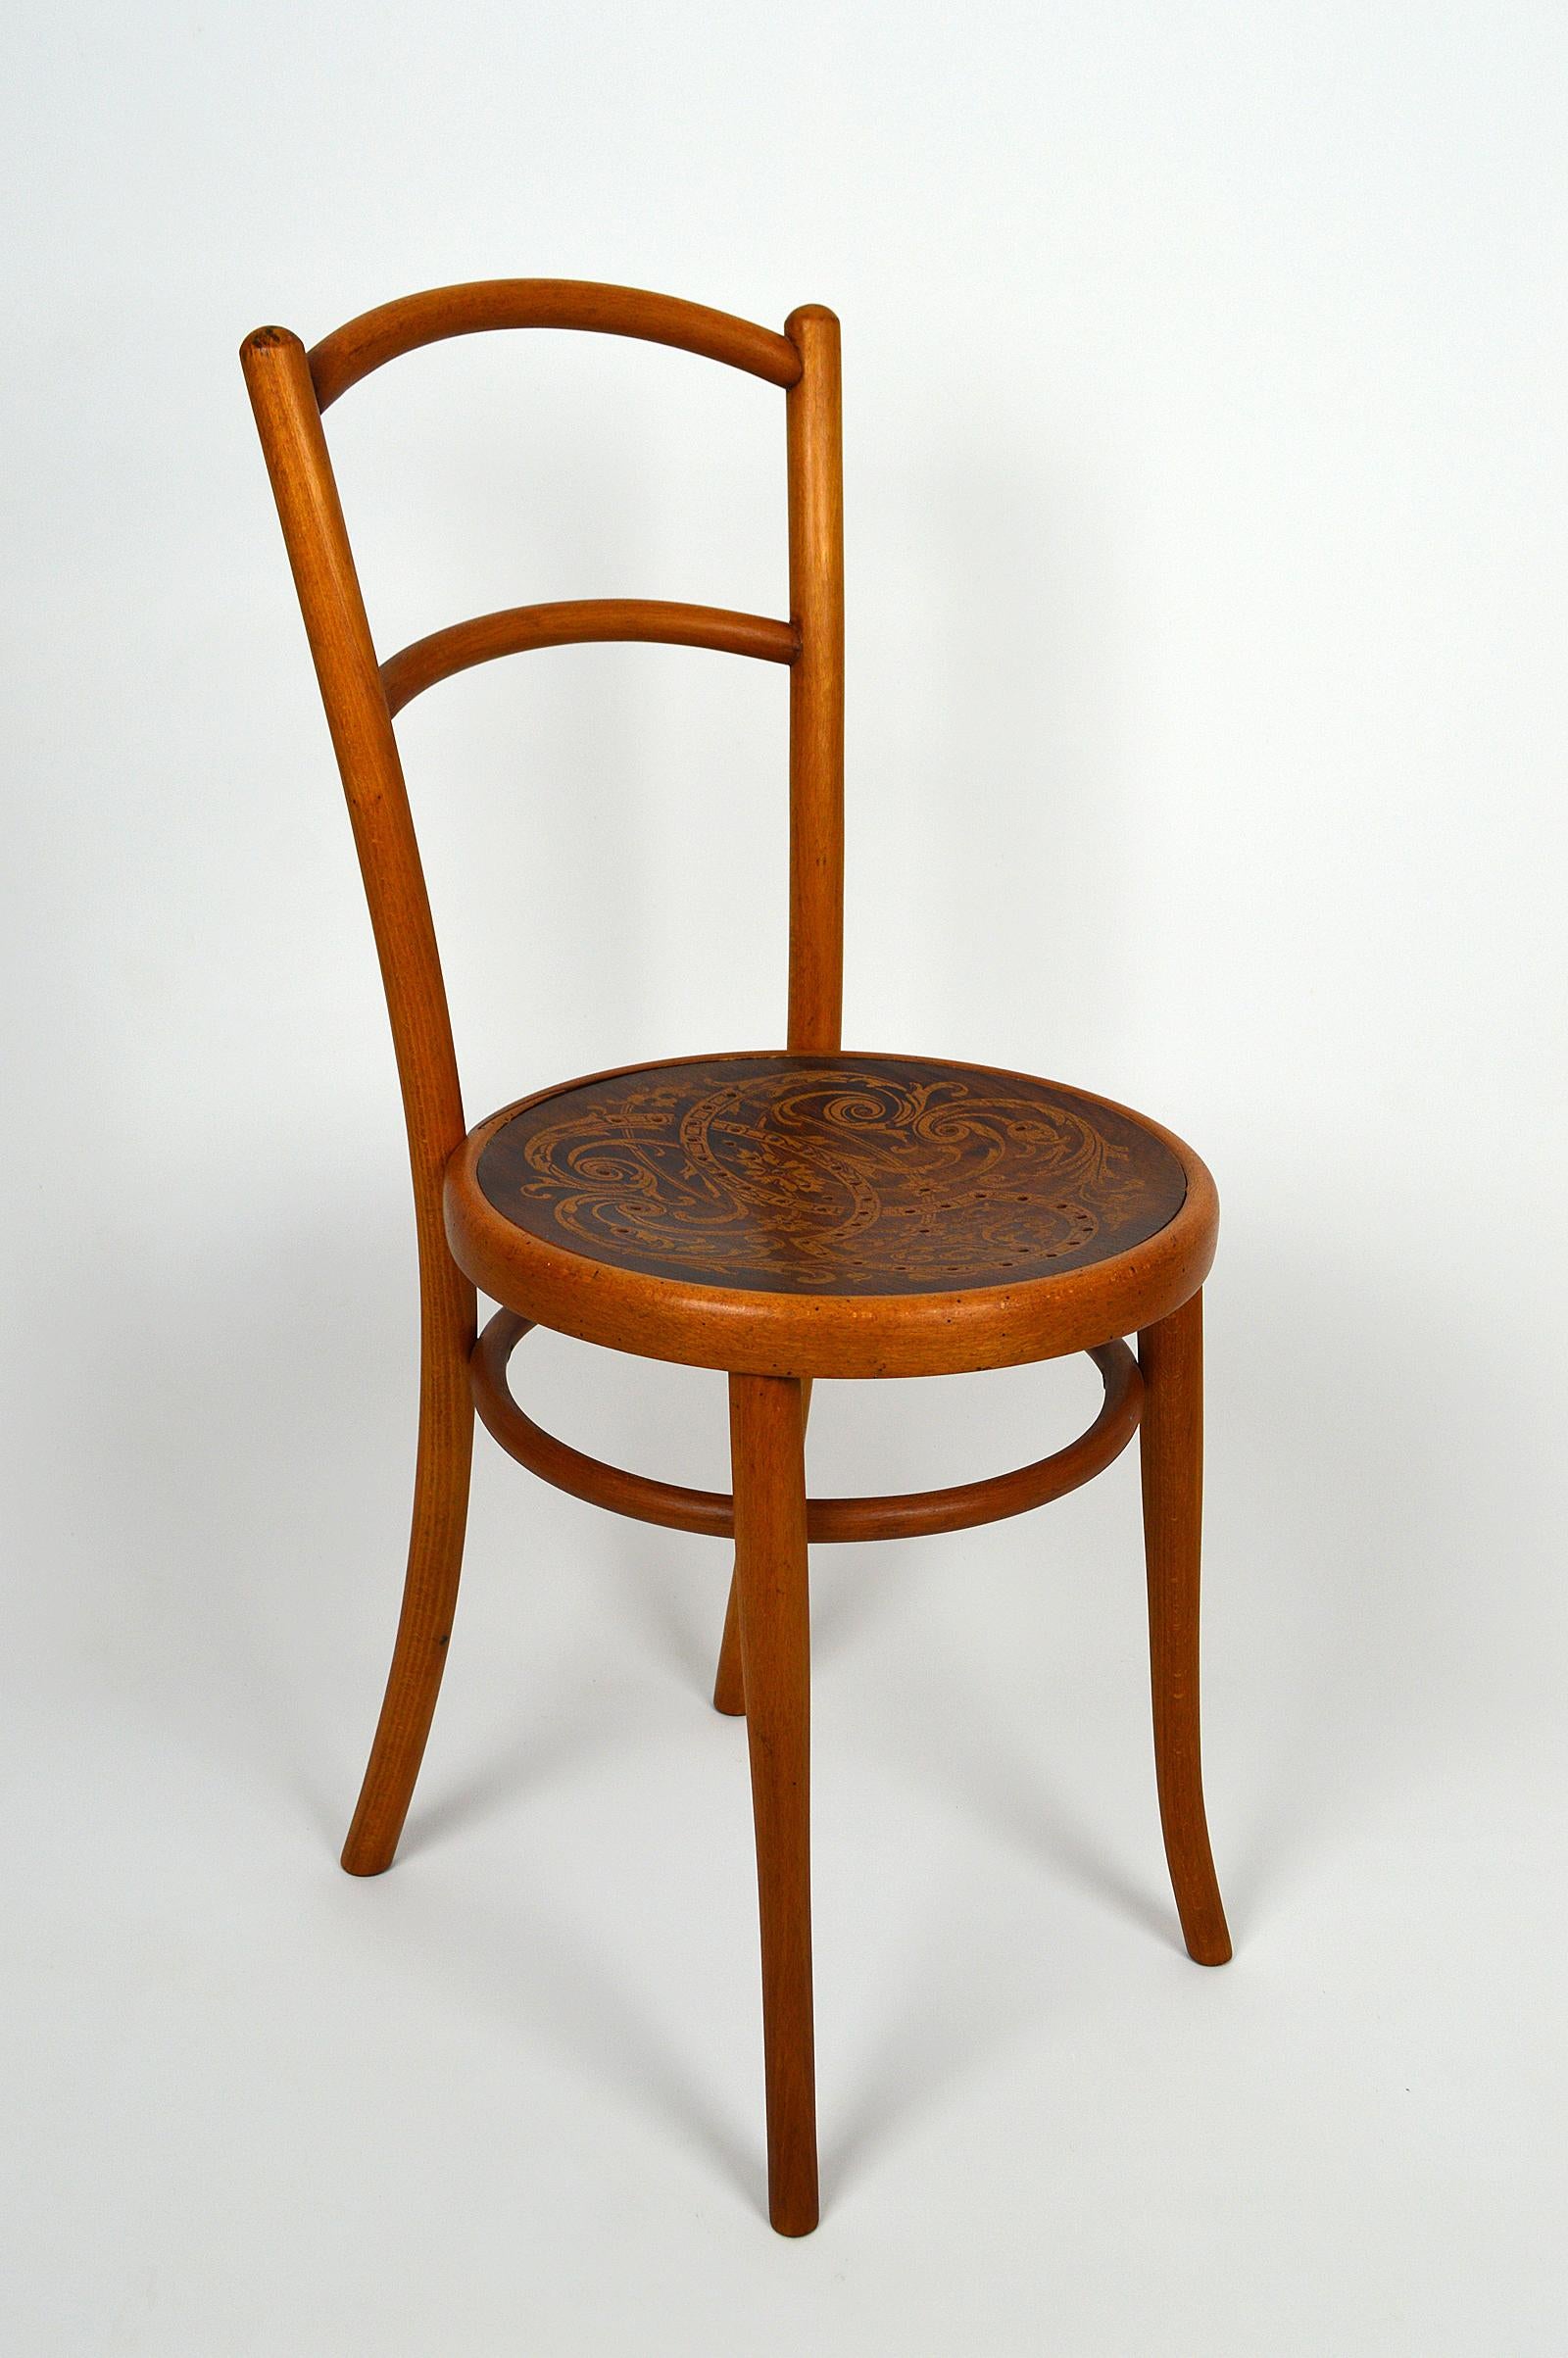 Bistro / bar chair produced by the Viennese workshops Jacob & Josef Kohn, one of the best-known bentwood manufacturers alongside Thonet, Mundus and Fischel.
Structure in bent beech wood with a very beautiful decorated seat.

Art Nouveau, Austria,